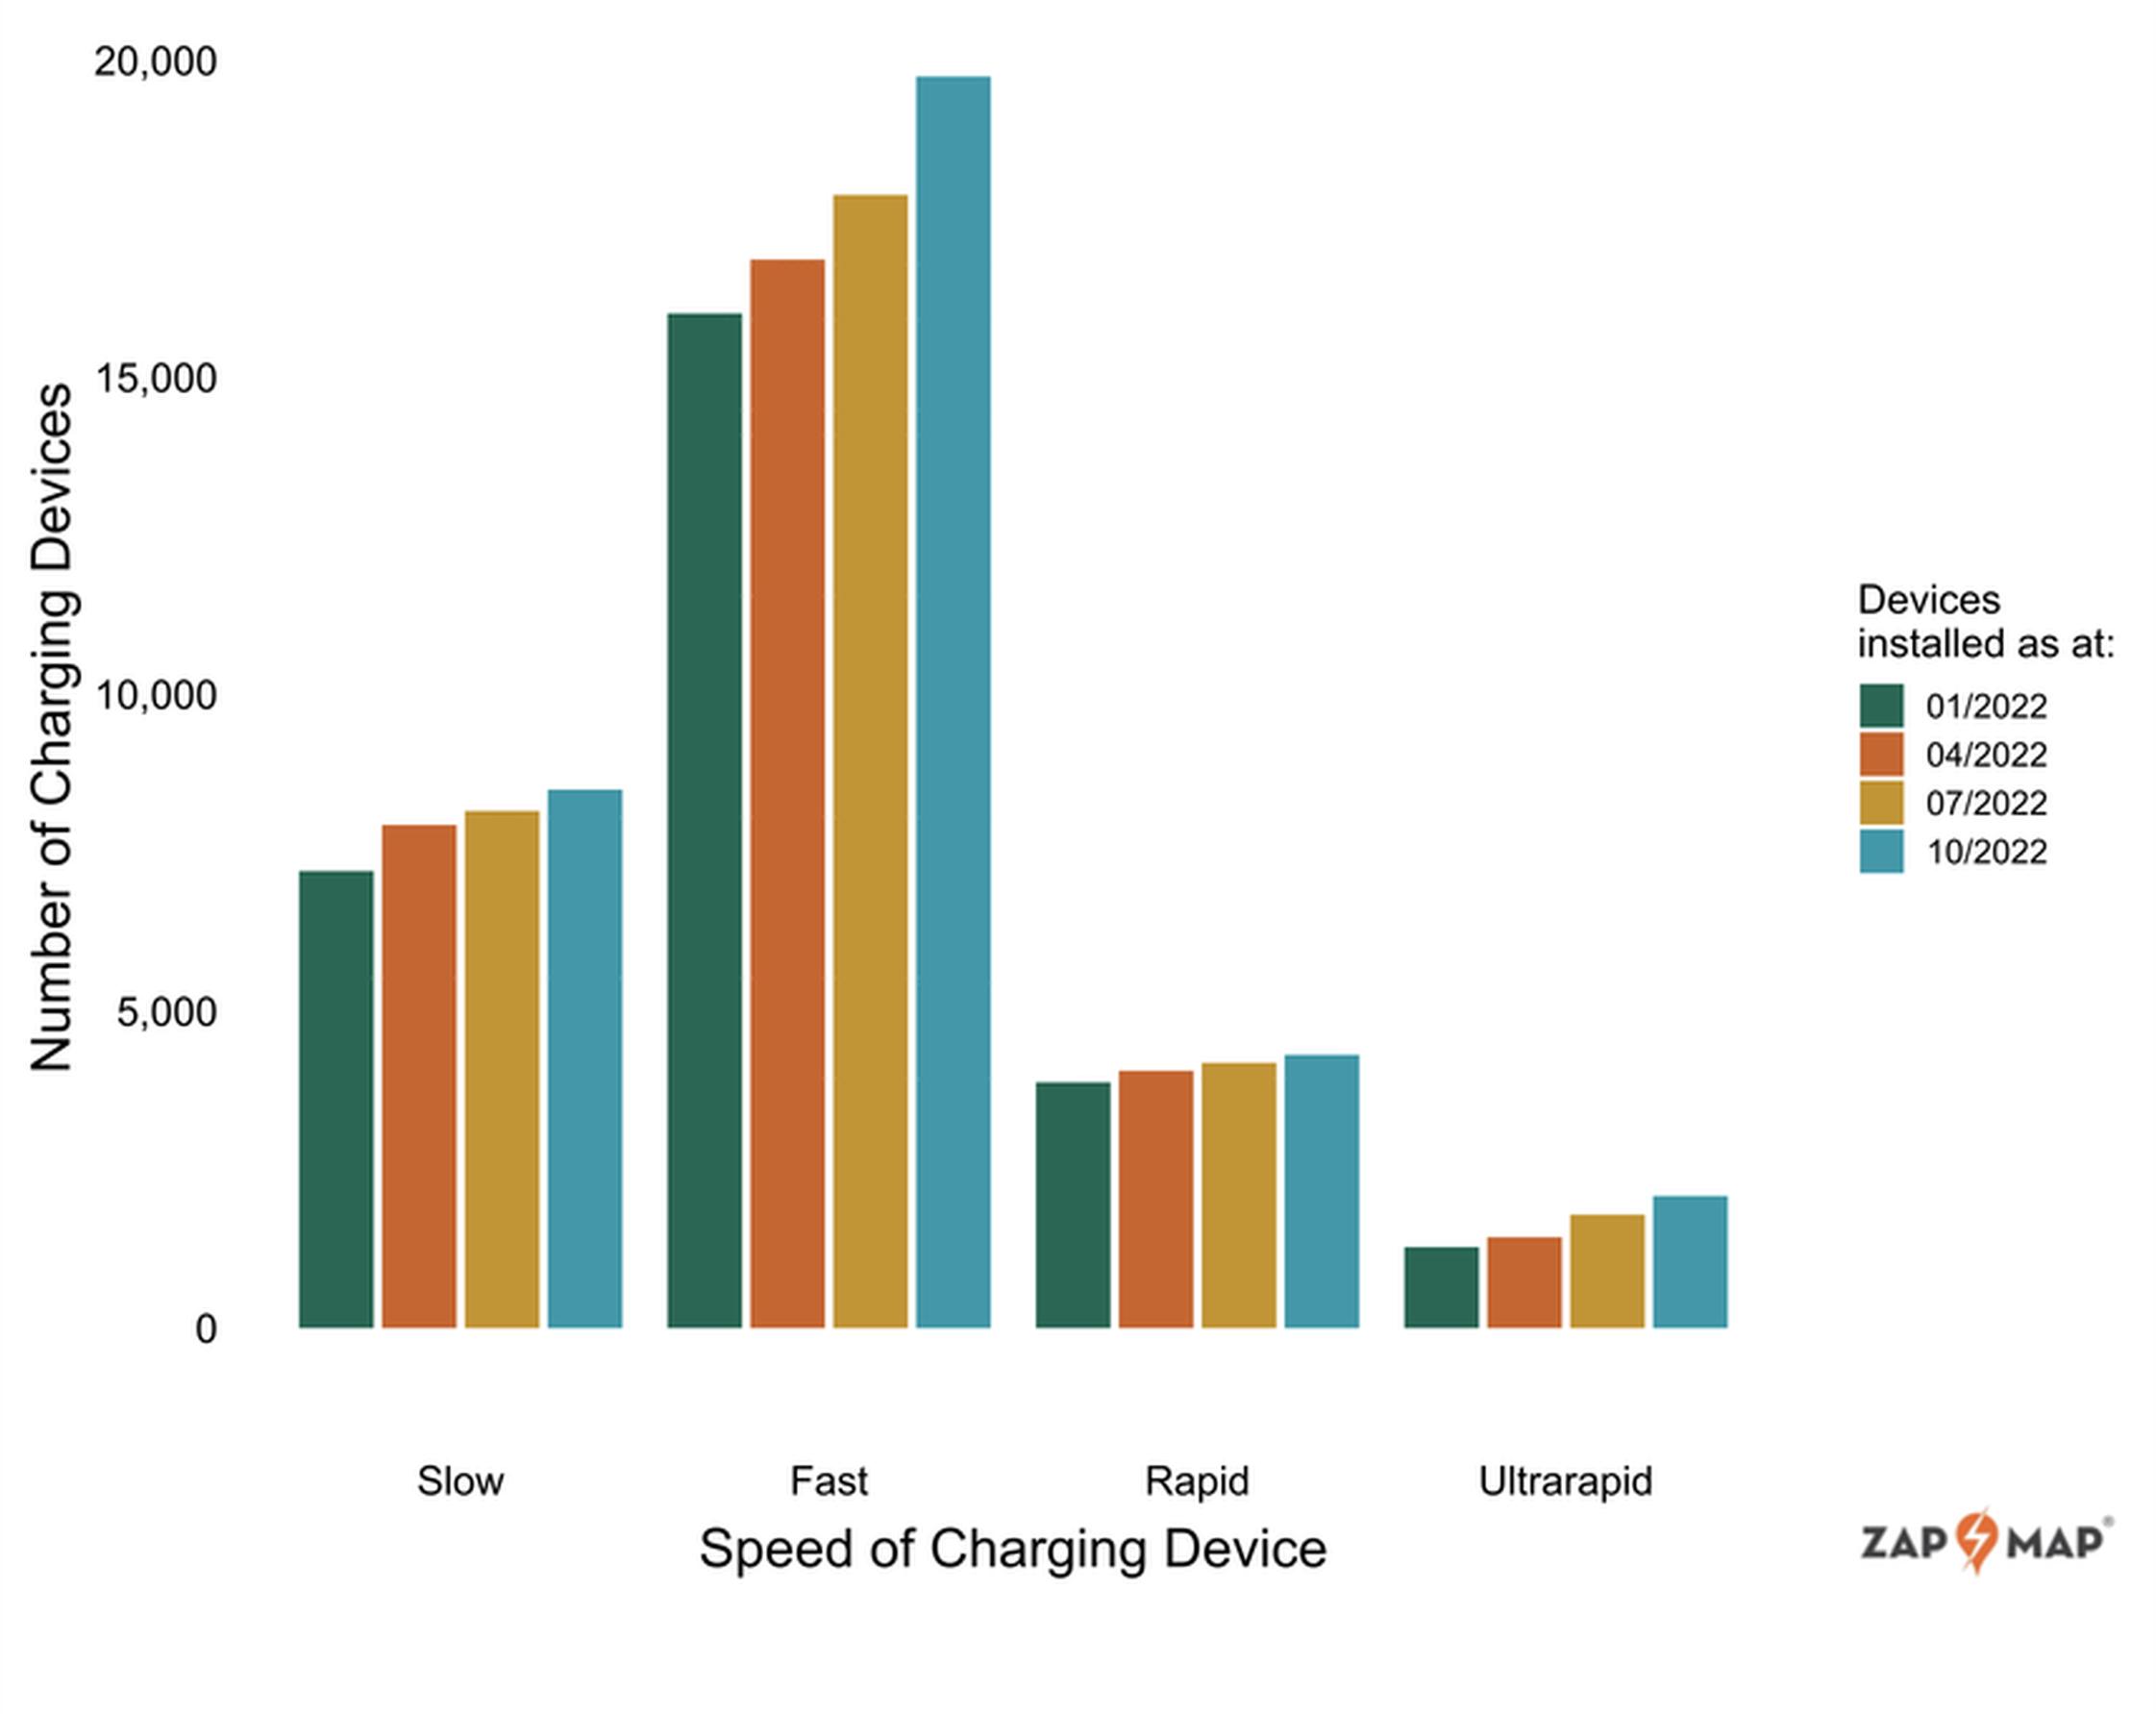 Public charging devices by charging speed 1 October 2022